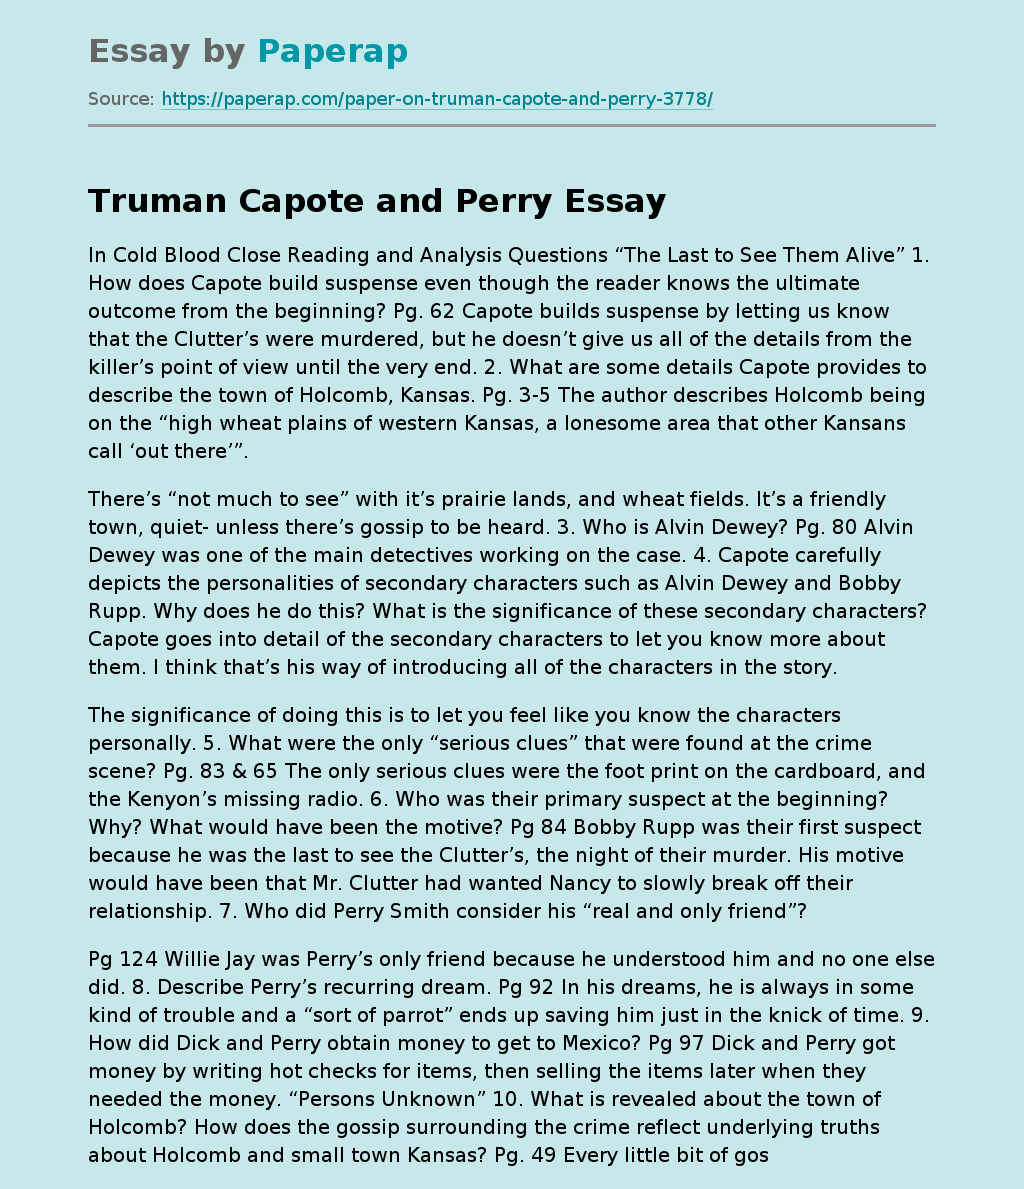 Truman Capote and Perry